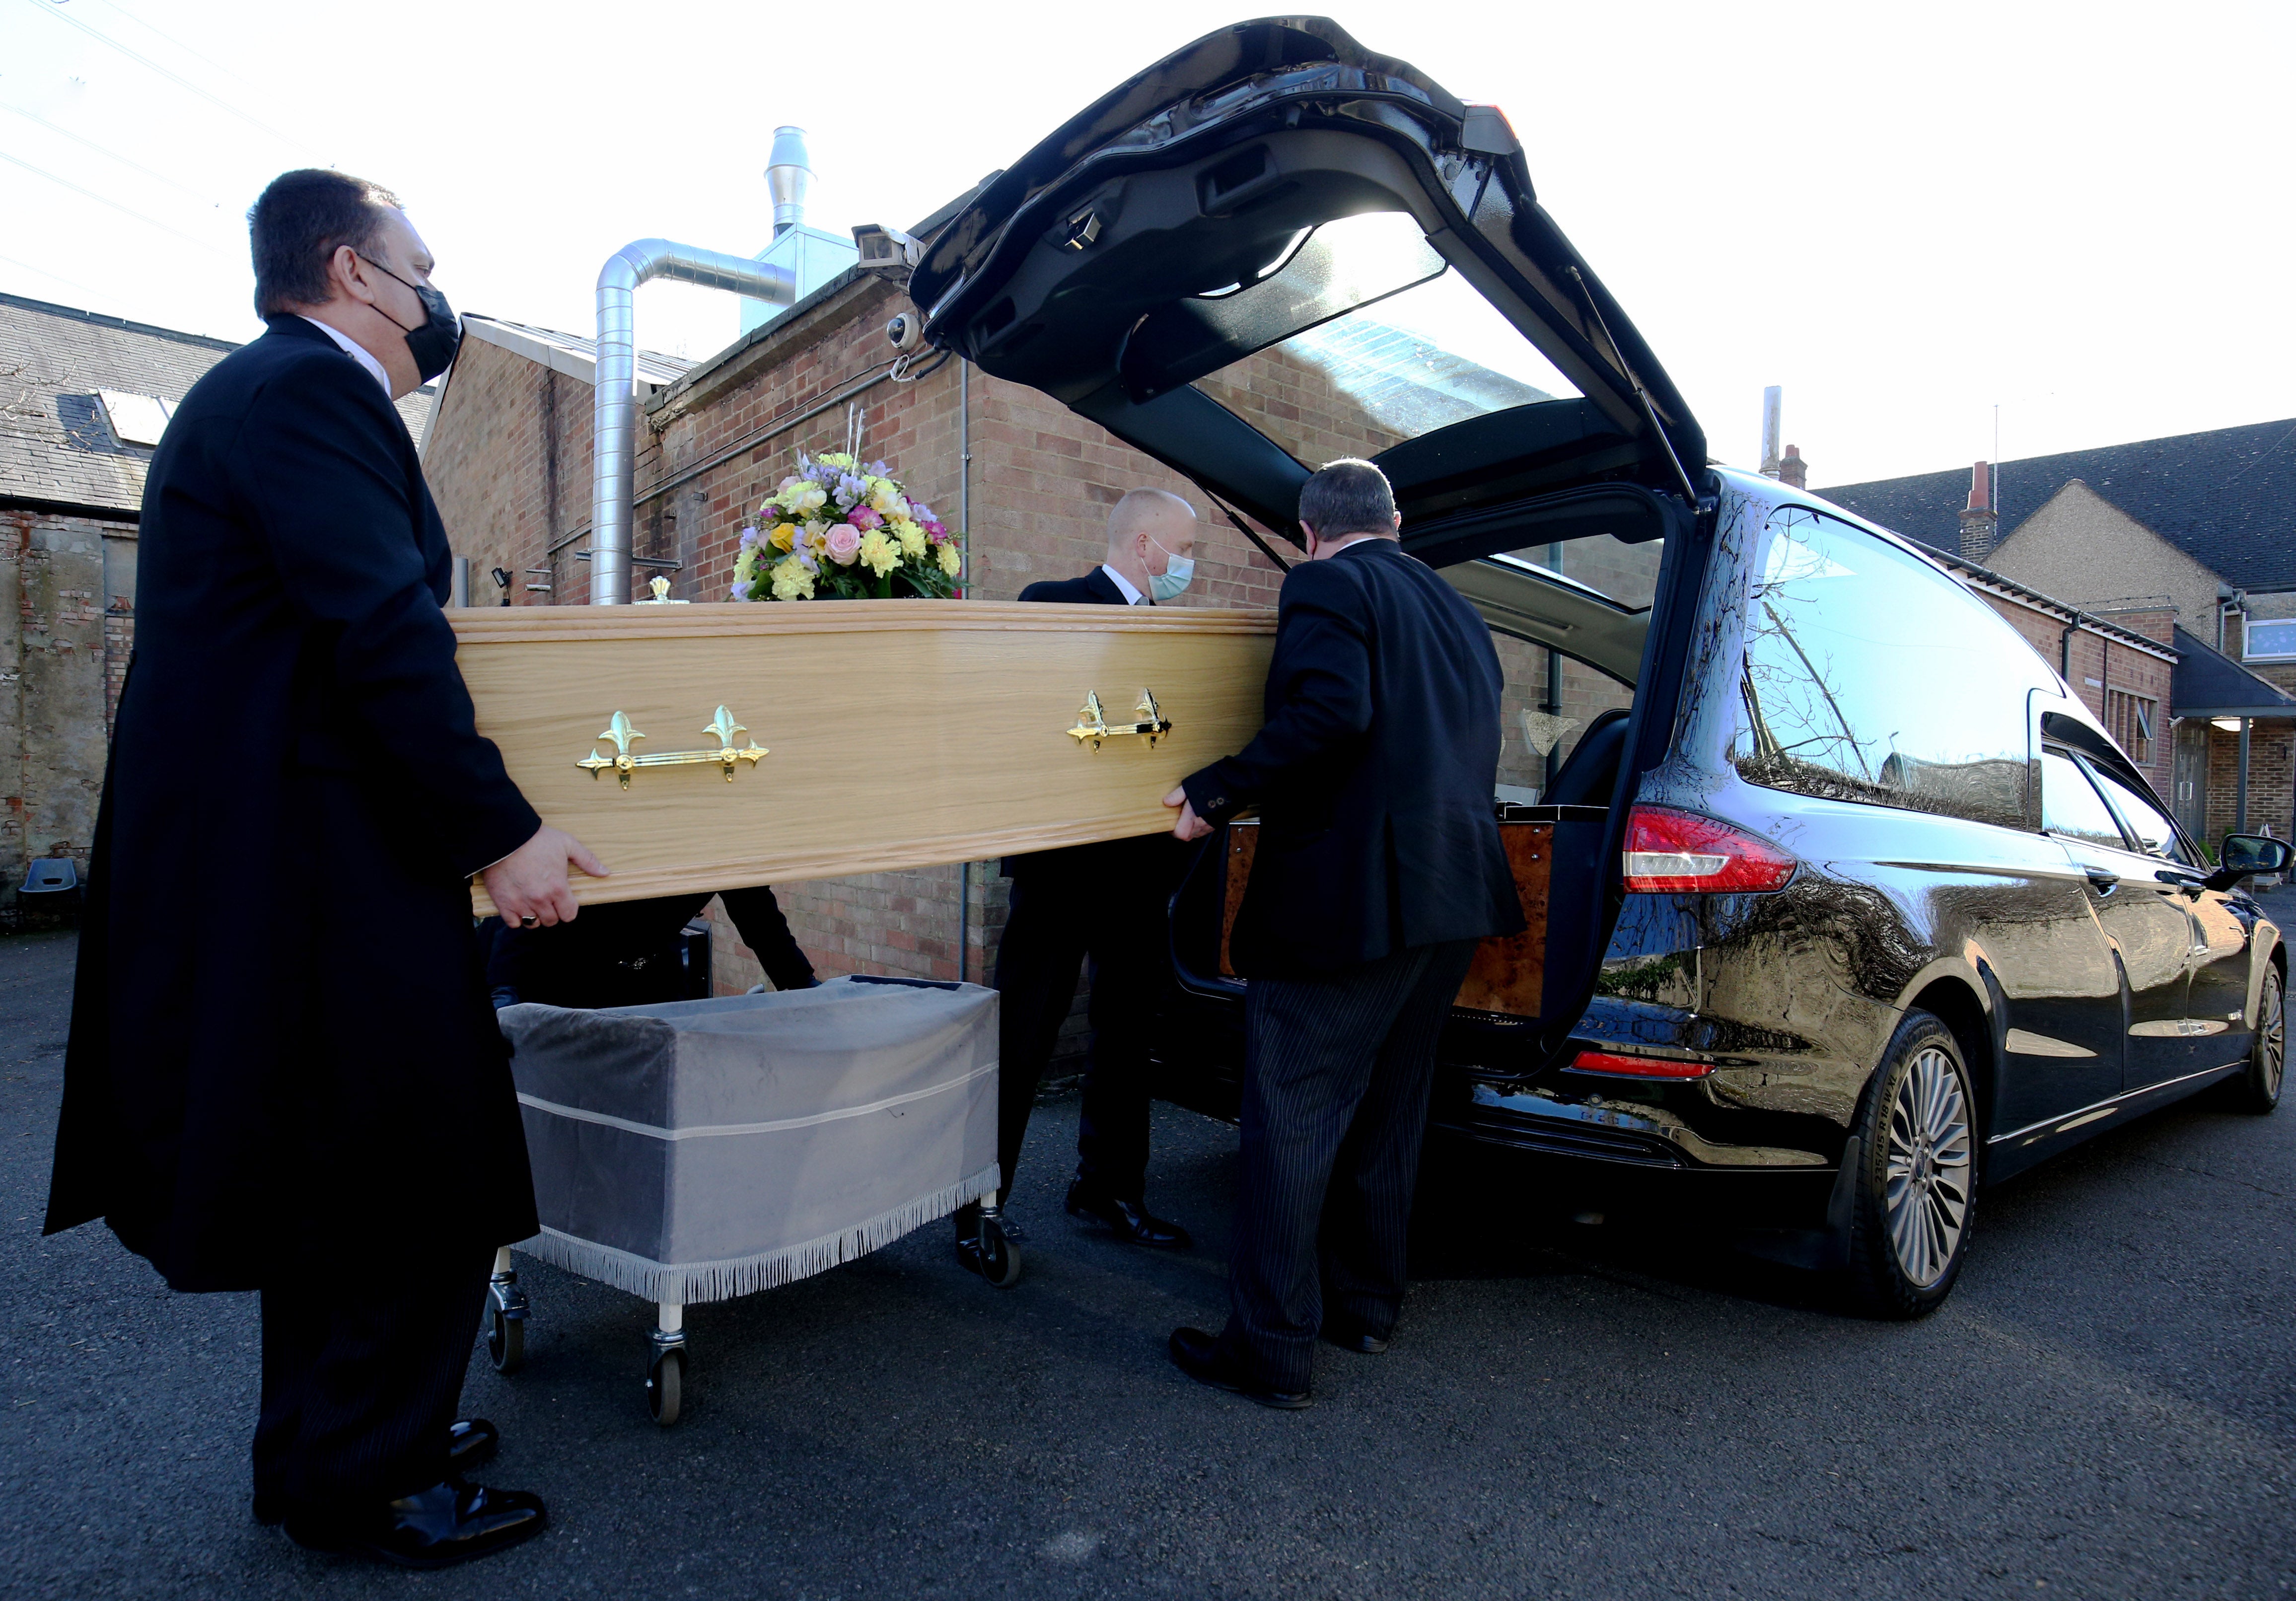 Dignity funerals said profits are up as more was spent on funerals. (Jonathan Brady / PA)